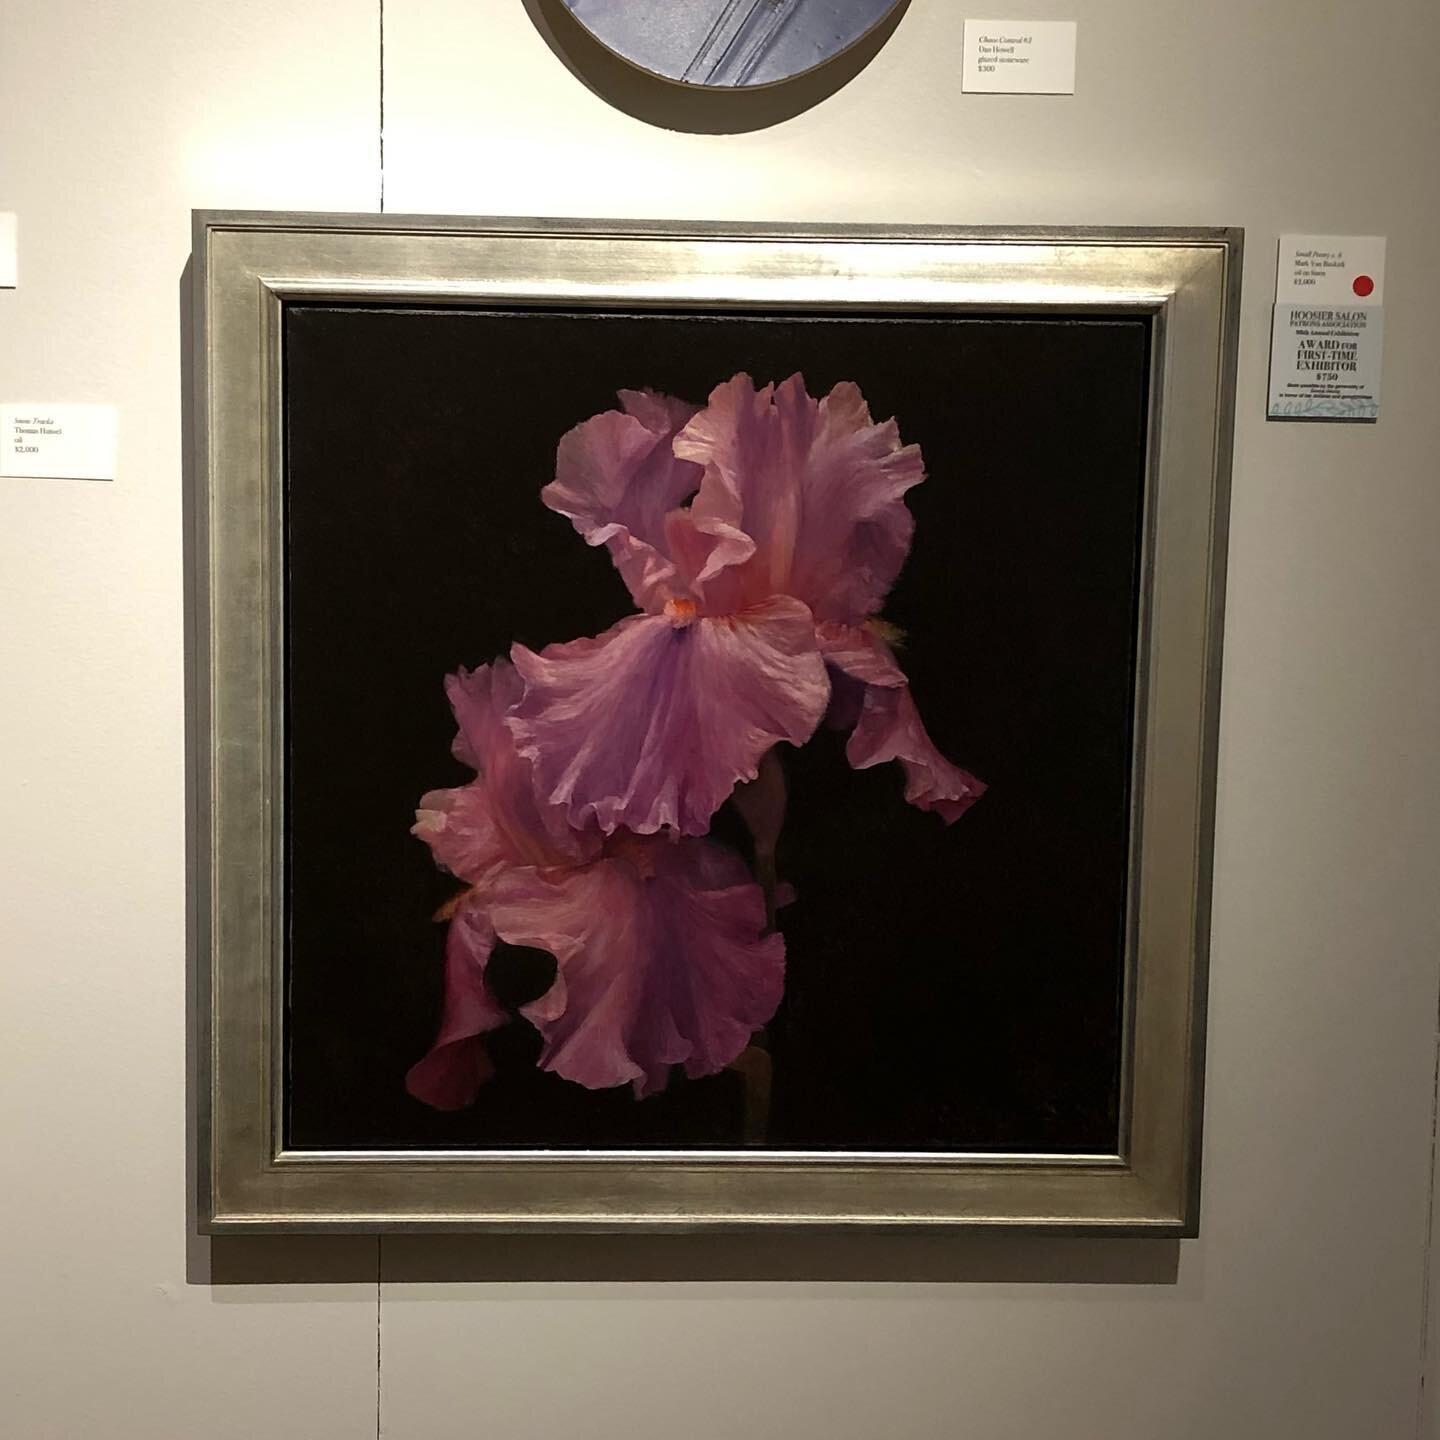 Great night at the State Museum! This Iris painting received an award and a new home 😃. Kudos to the Hoosier Salon for hosting a wonderful exhibition and event!